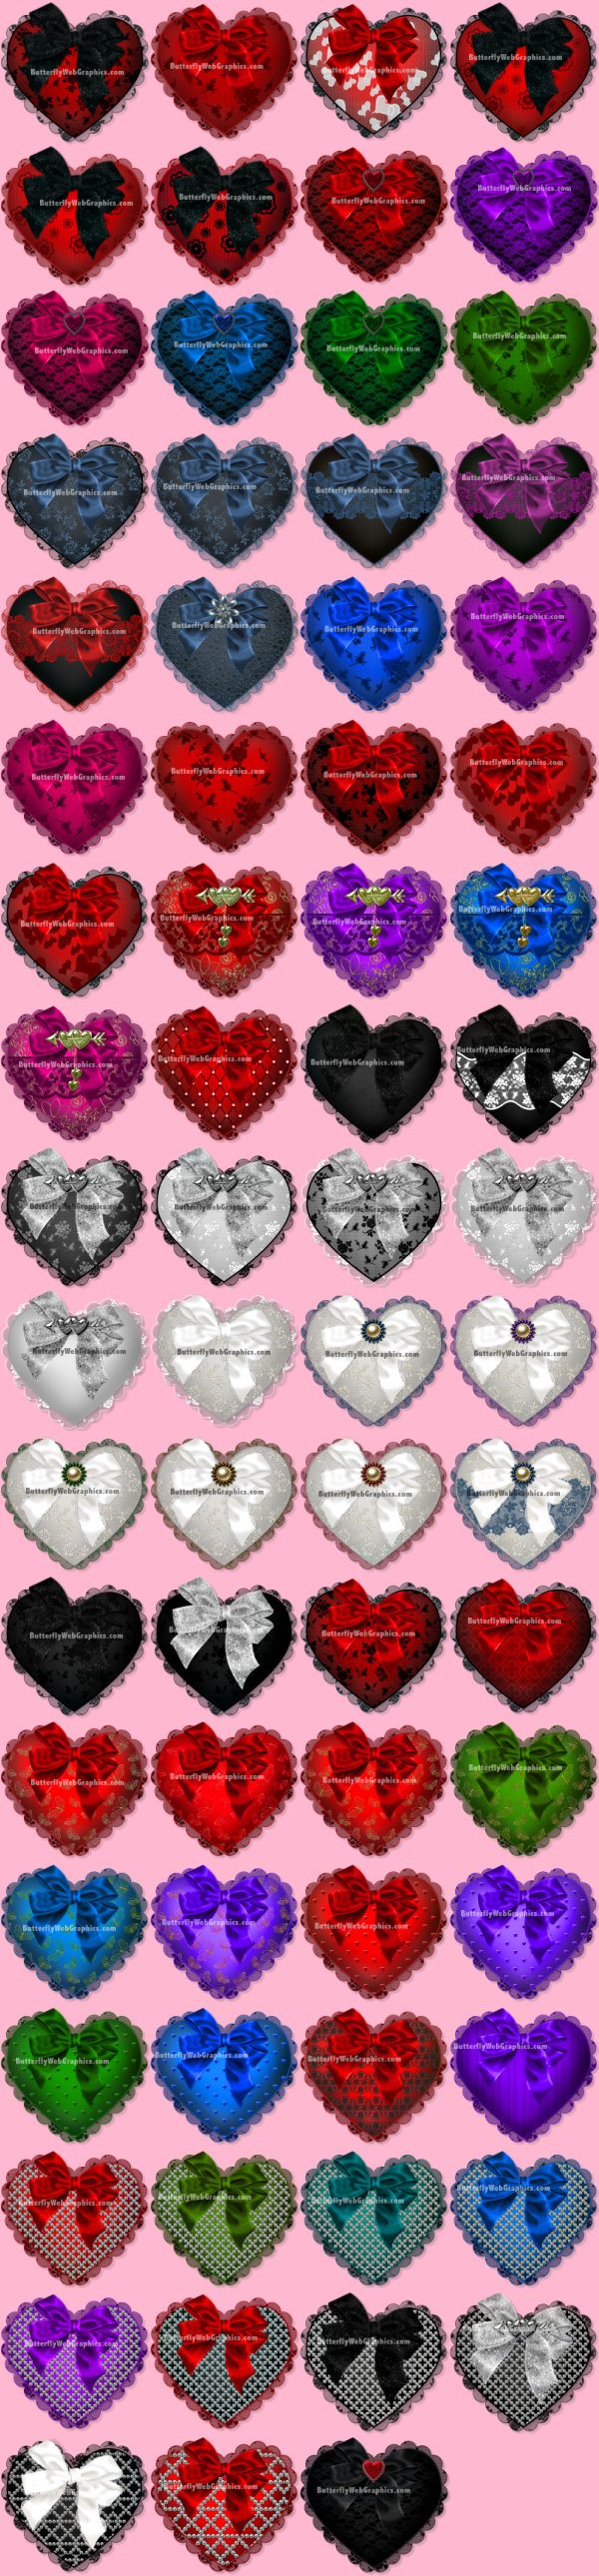 Hearts Psp Tubes Heart Clipart Heart Valentines Fancy Lace Hearts